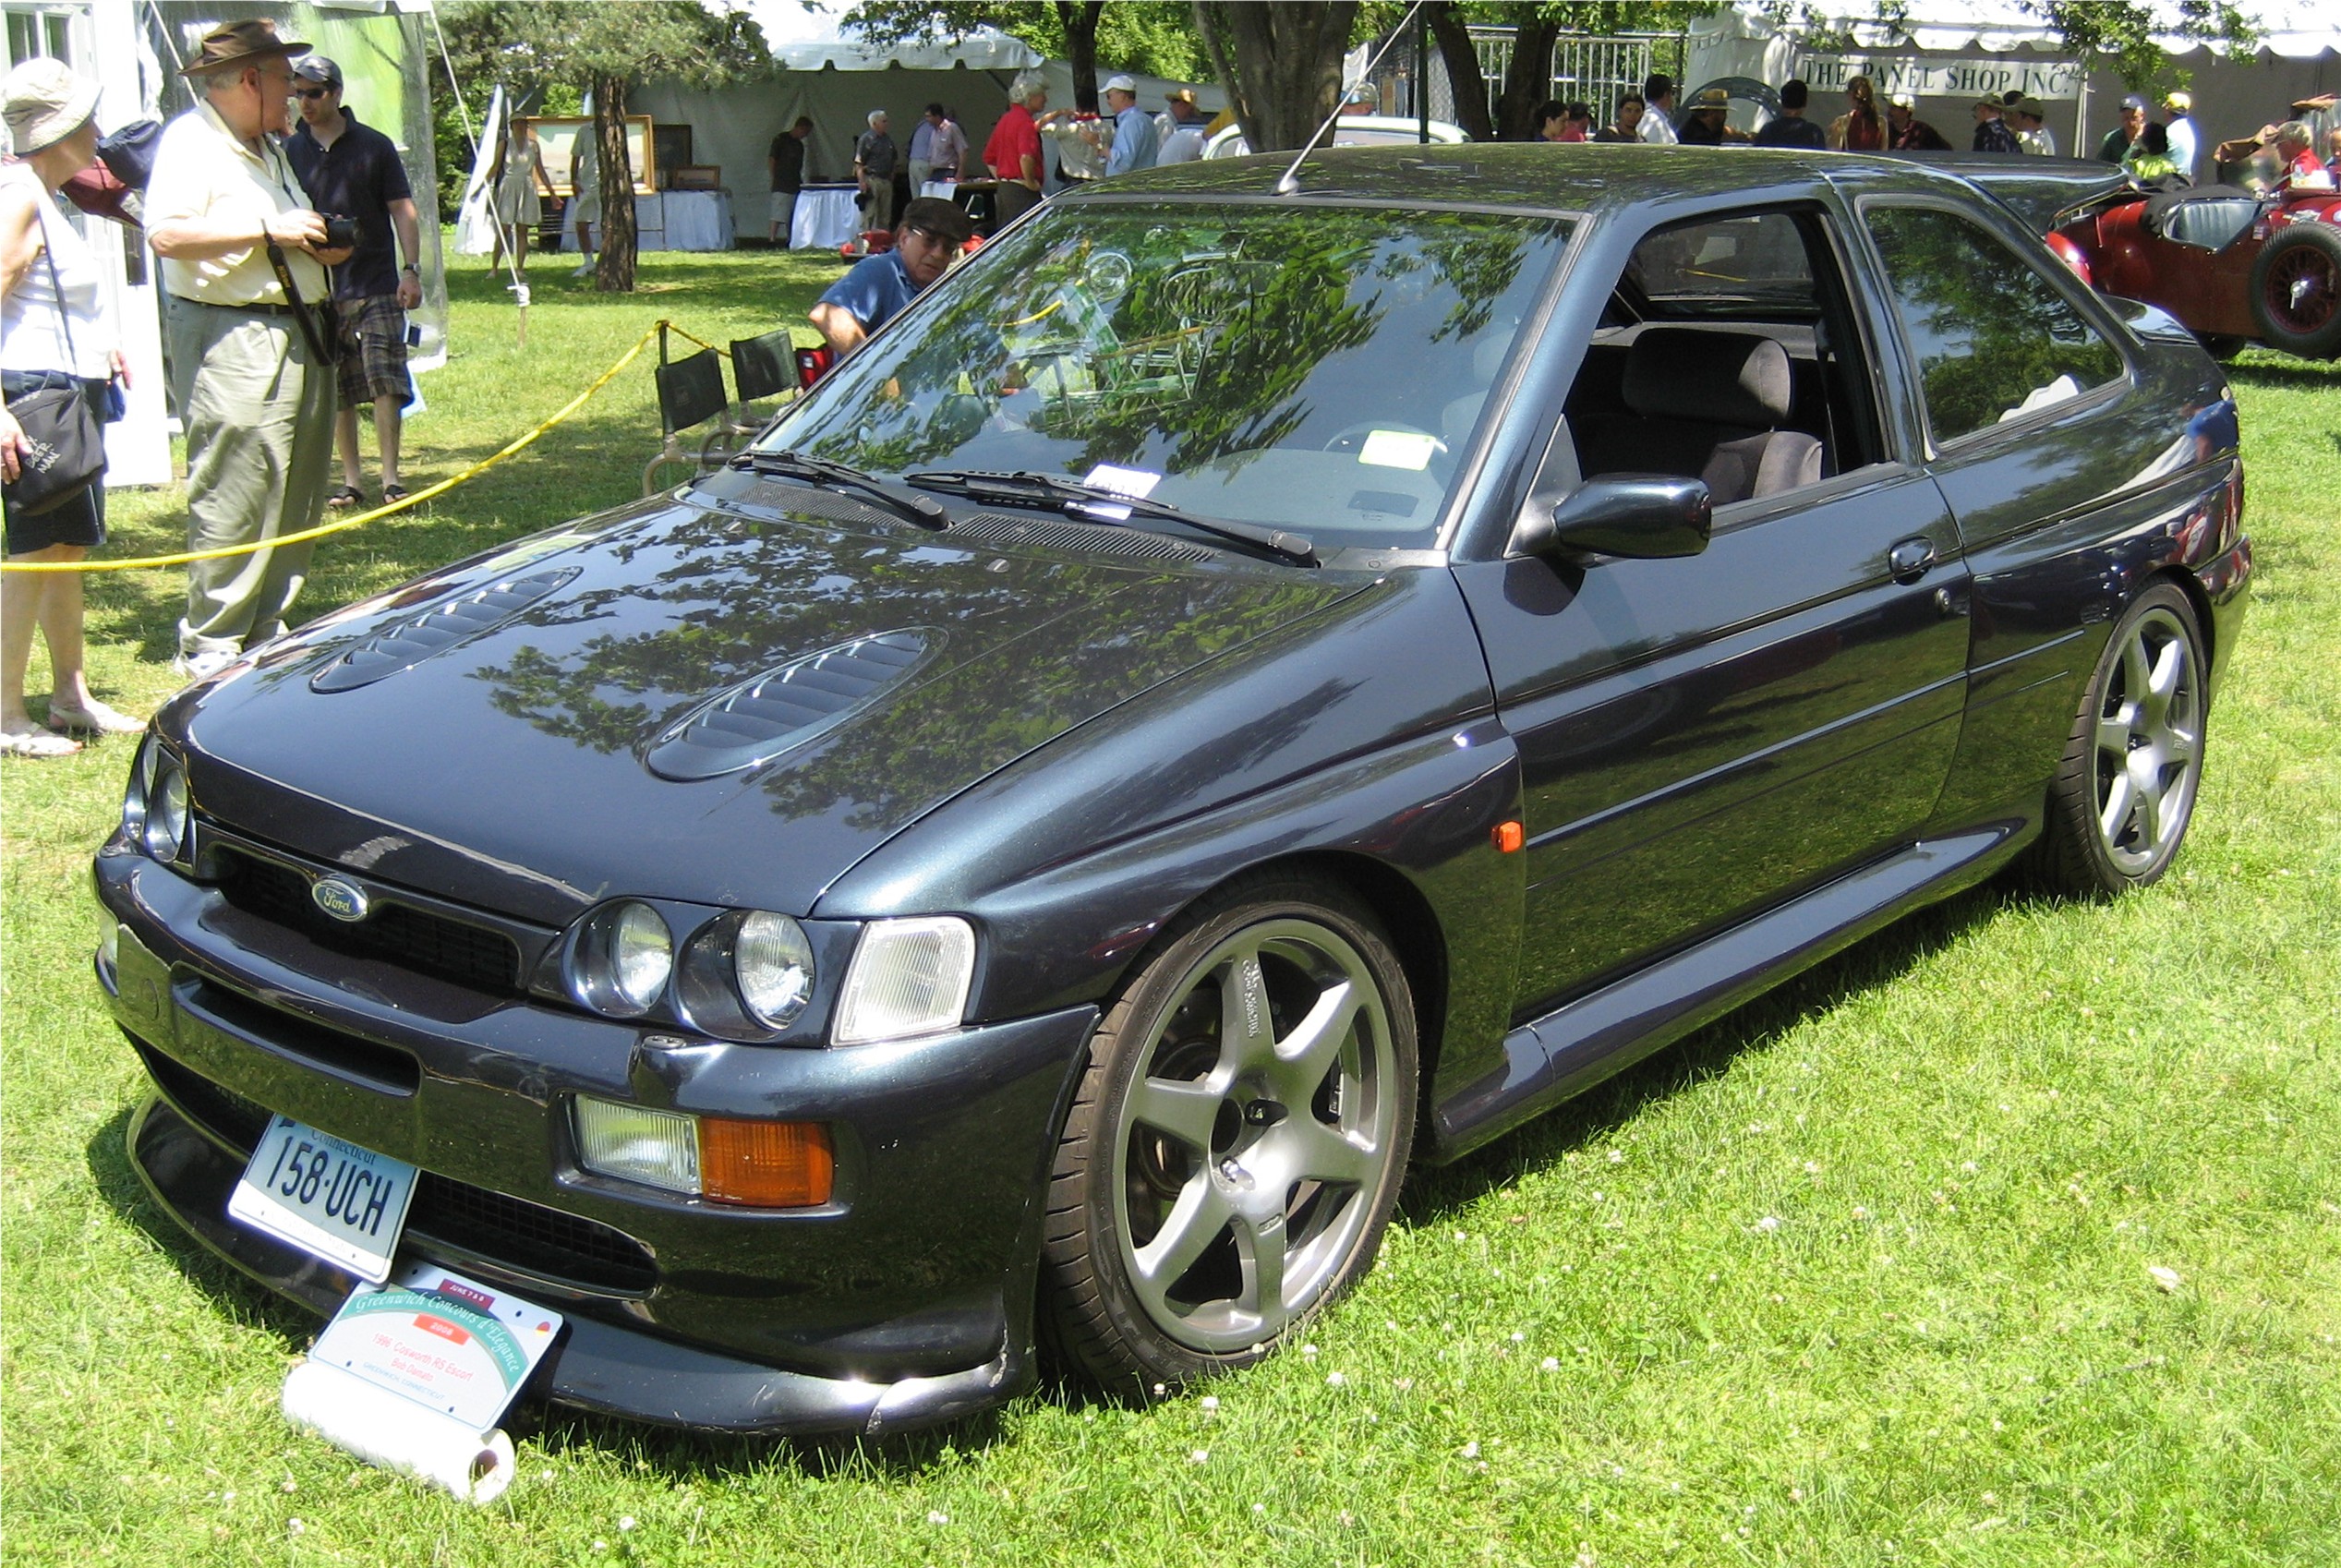 https://static.wikia.nocookie.net/tractors/images/9/98/1996_Cosworth_RS_Escort.jpg/revision/latest?cb=20110513144151